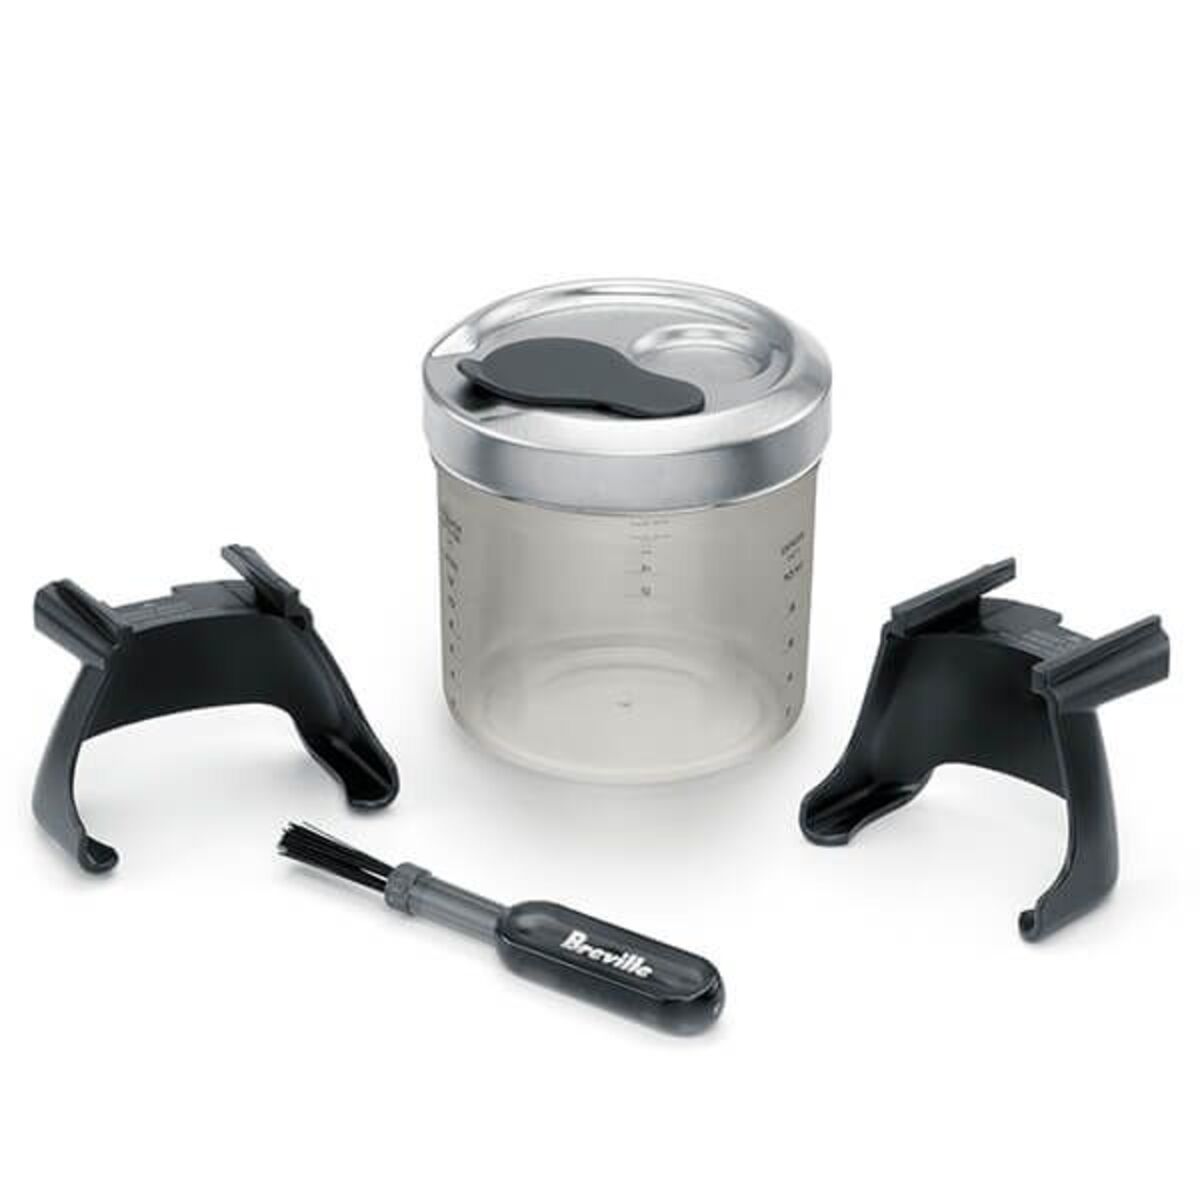 Sage BCG820BSSUK The Smart Grinder Pro Coffee Grinder, Stainless Steel